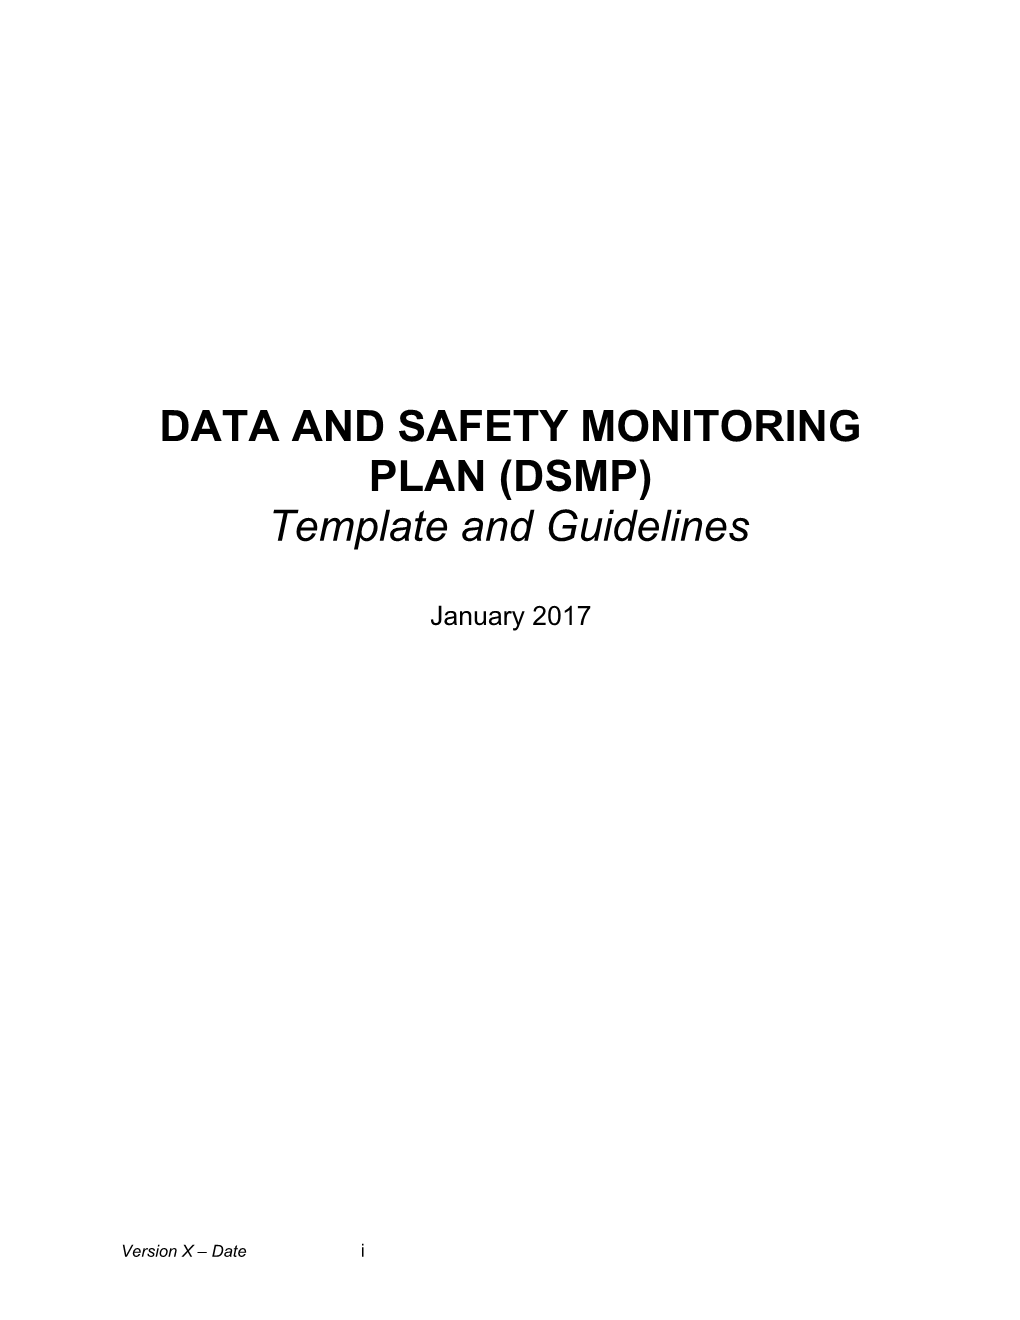 Data and Safety Monitoring Plan (Dsmp)